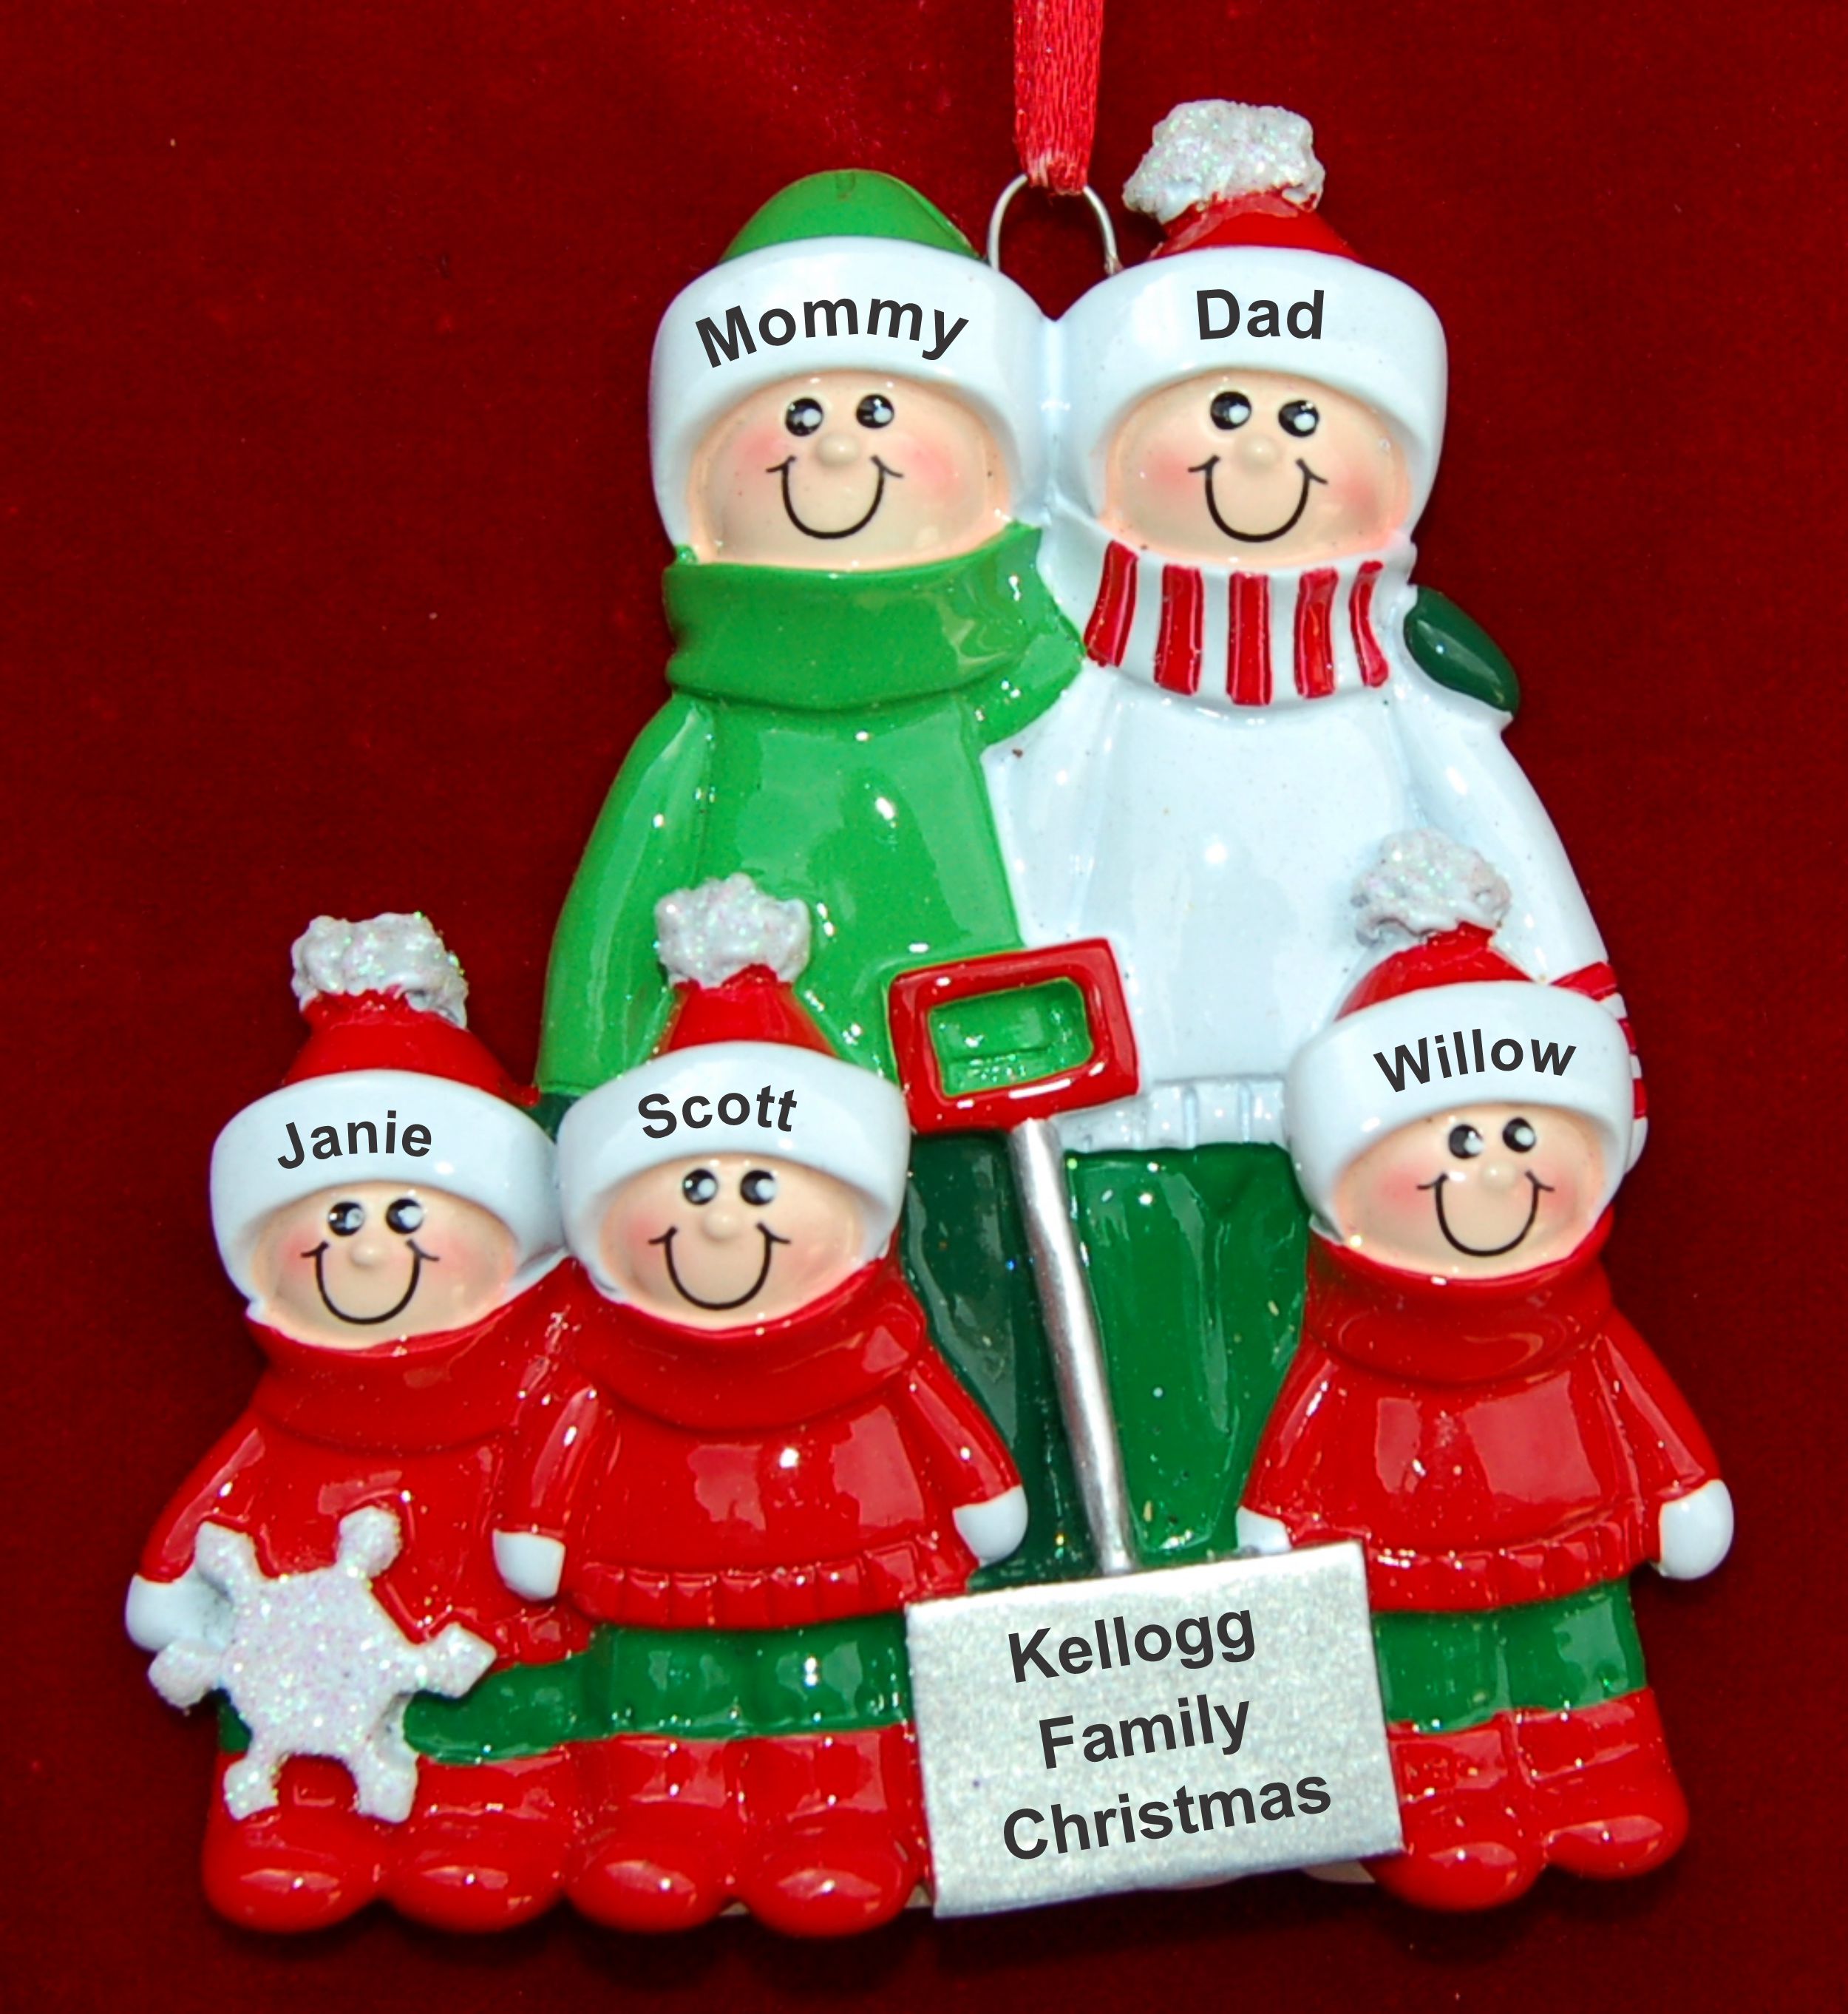 Family Christmas Ornament Winter Fun Personalized by RussellRhodes.com